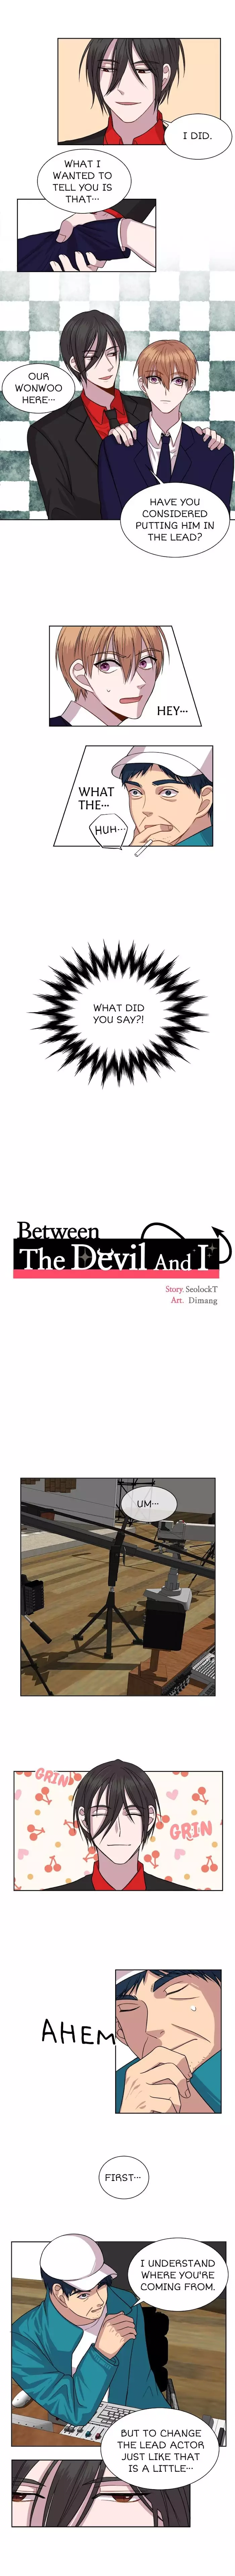 Between The Devil And Me - 5 page 5-2a3ac68f